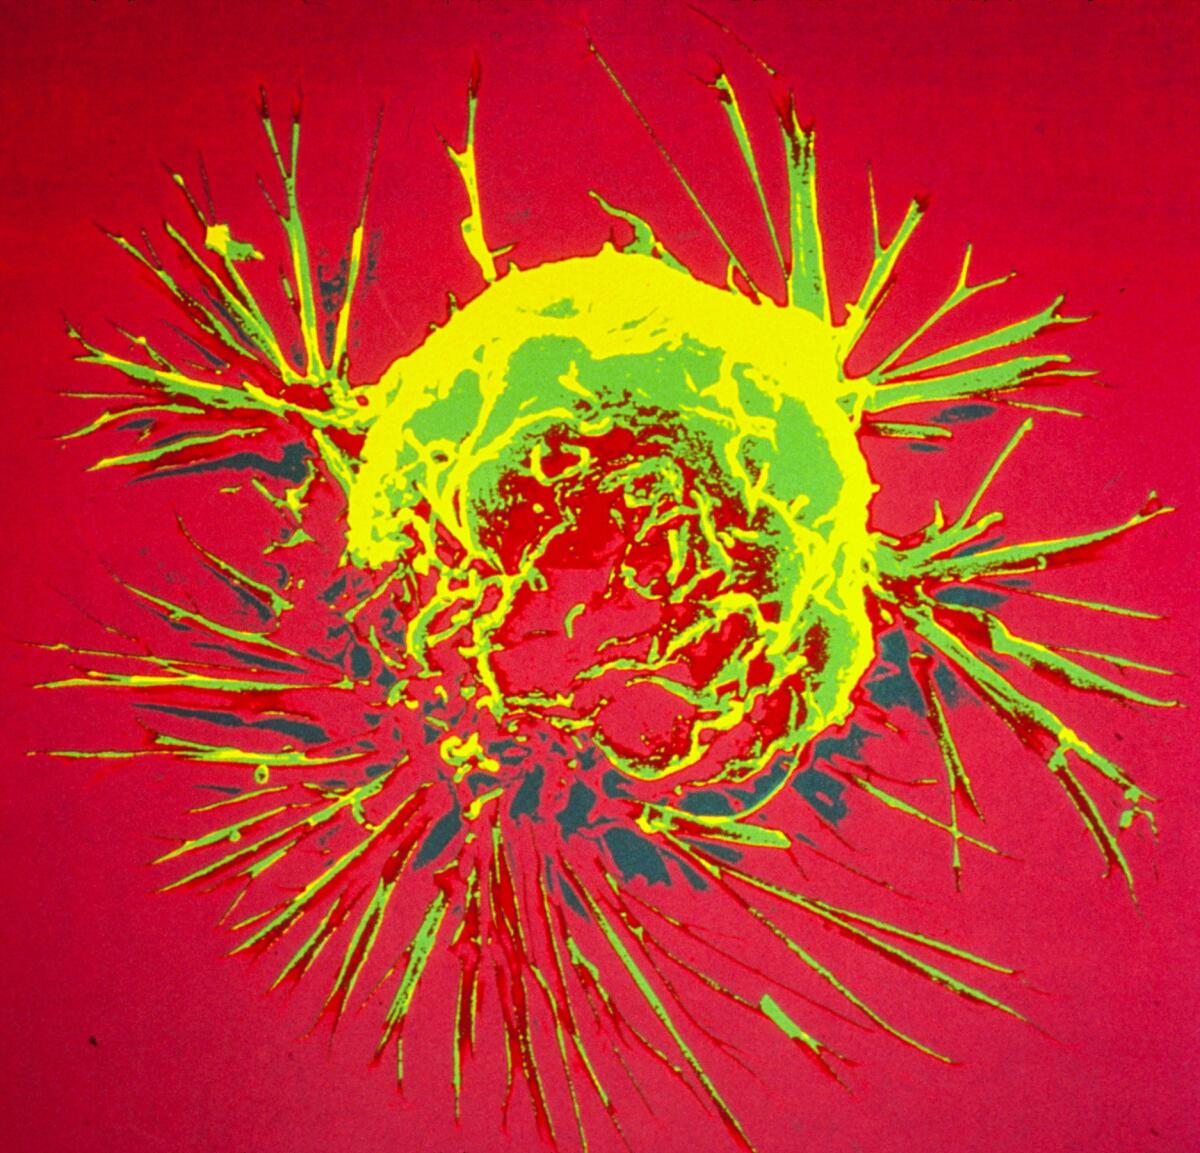 Research published Wednesday in the New England Journal of Medicine indicates that exposure to radiation during breast cancer treatment is linked to an increased risk of heart disease. Shown above is an electron microscope image of a breast cancer cell.